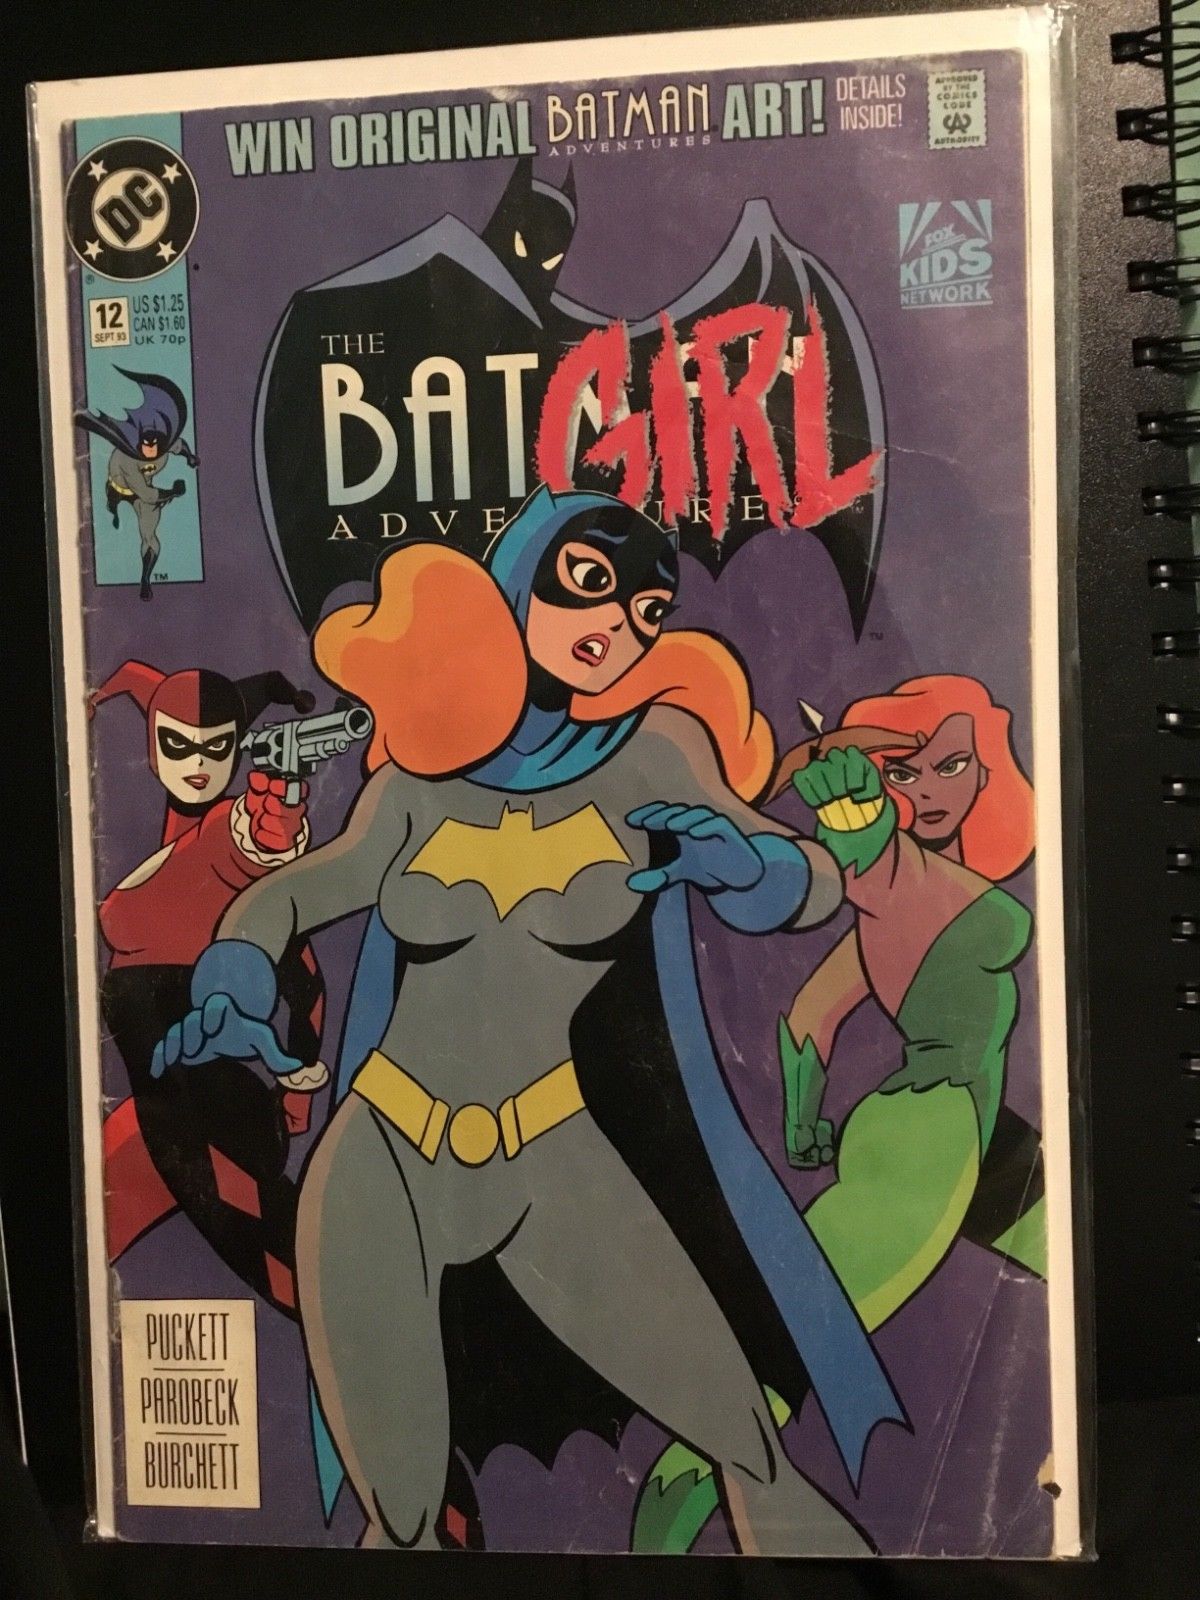 BATMAN ADVENTURES #12 1st appearance of Harley Quinn. Rare. Used condition.